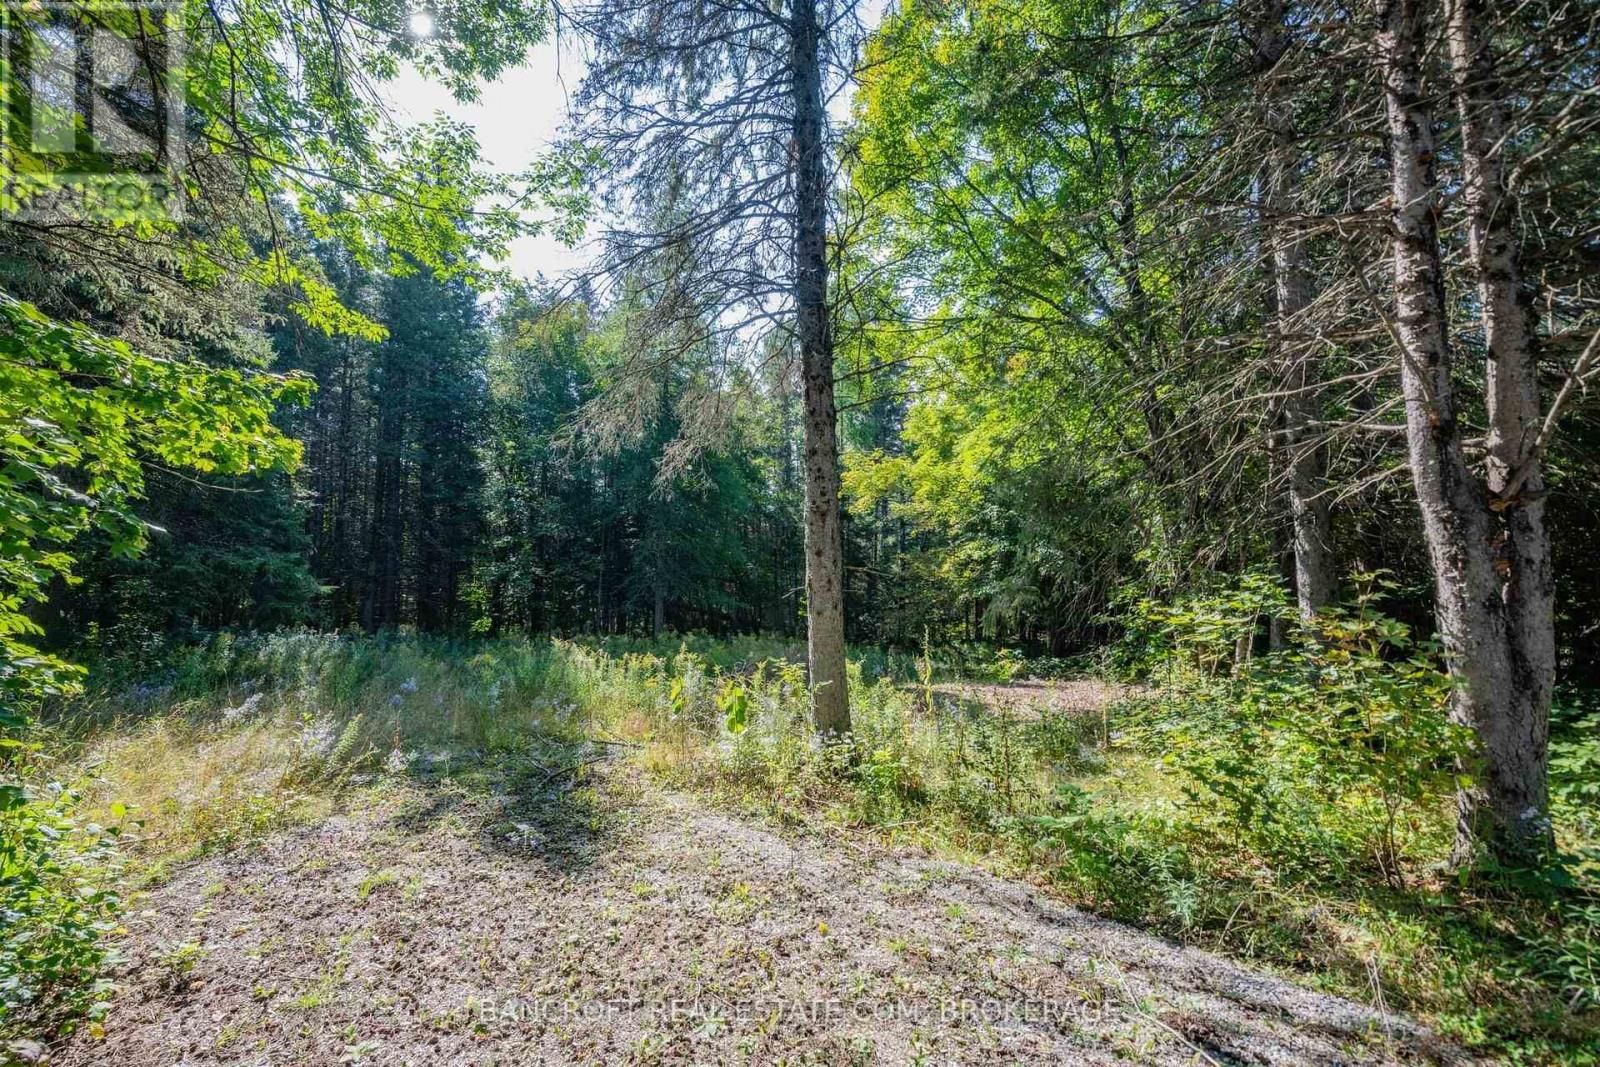 Main Photo: 1972 WESLEMKOON LAKE RD in Tudor & Cashel: Vacant Land for sale : MLS®# X7008970